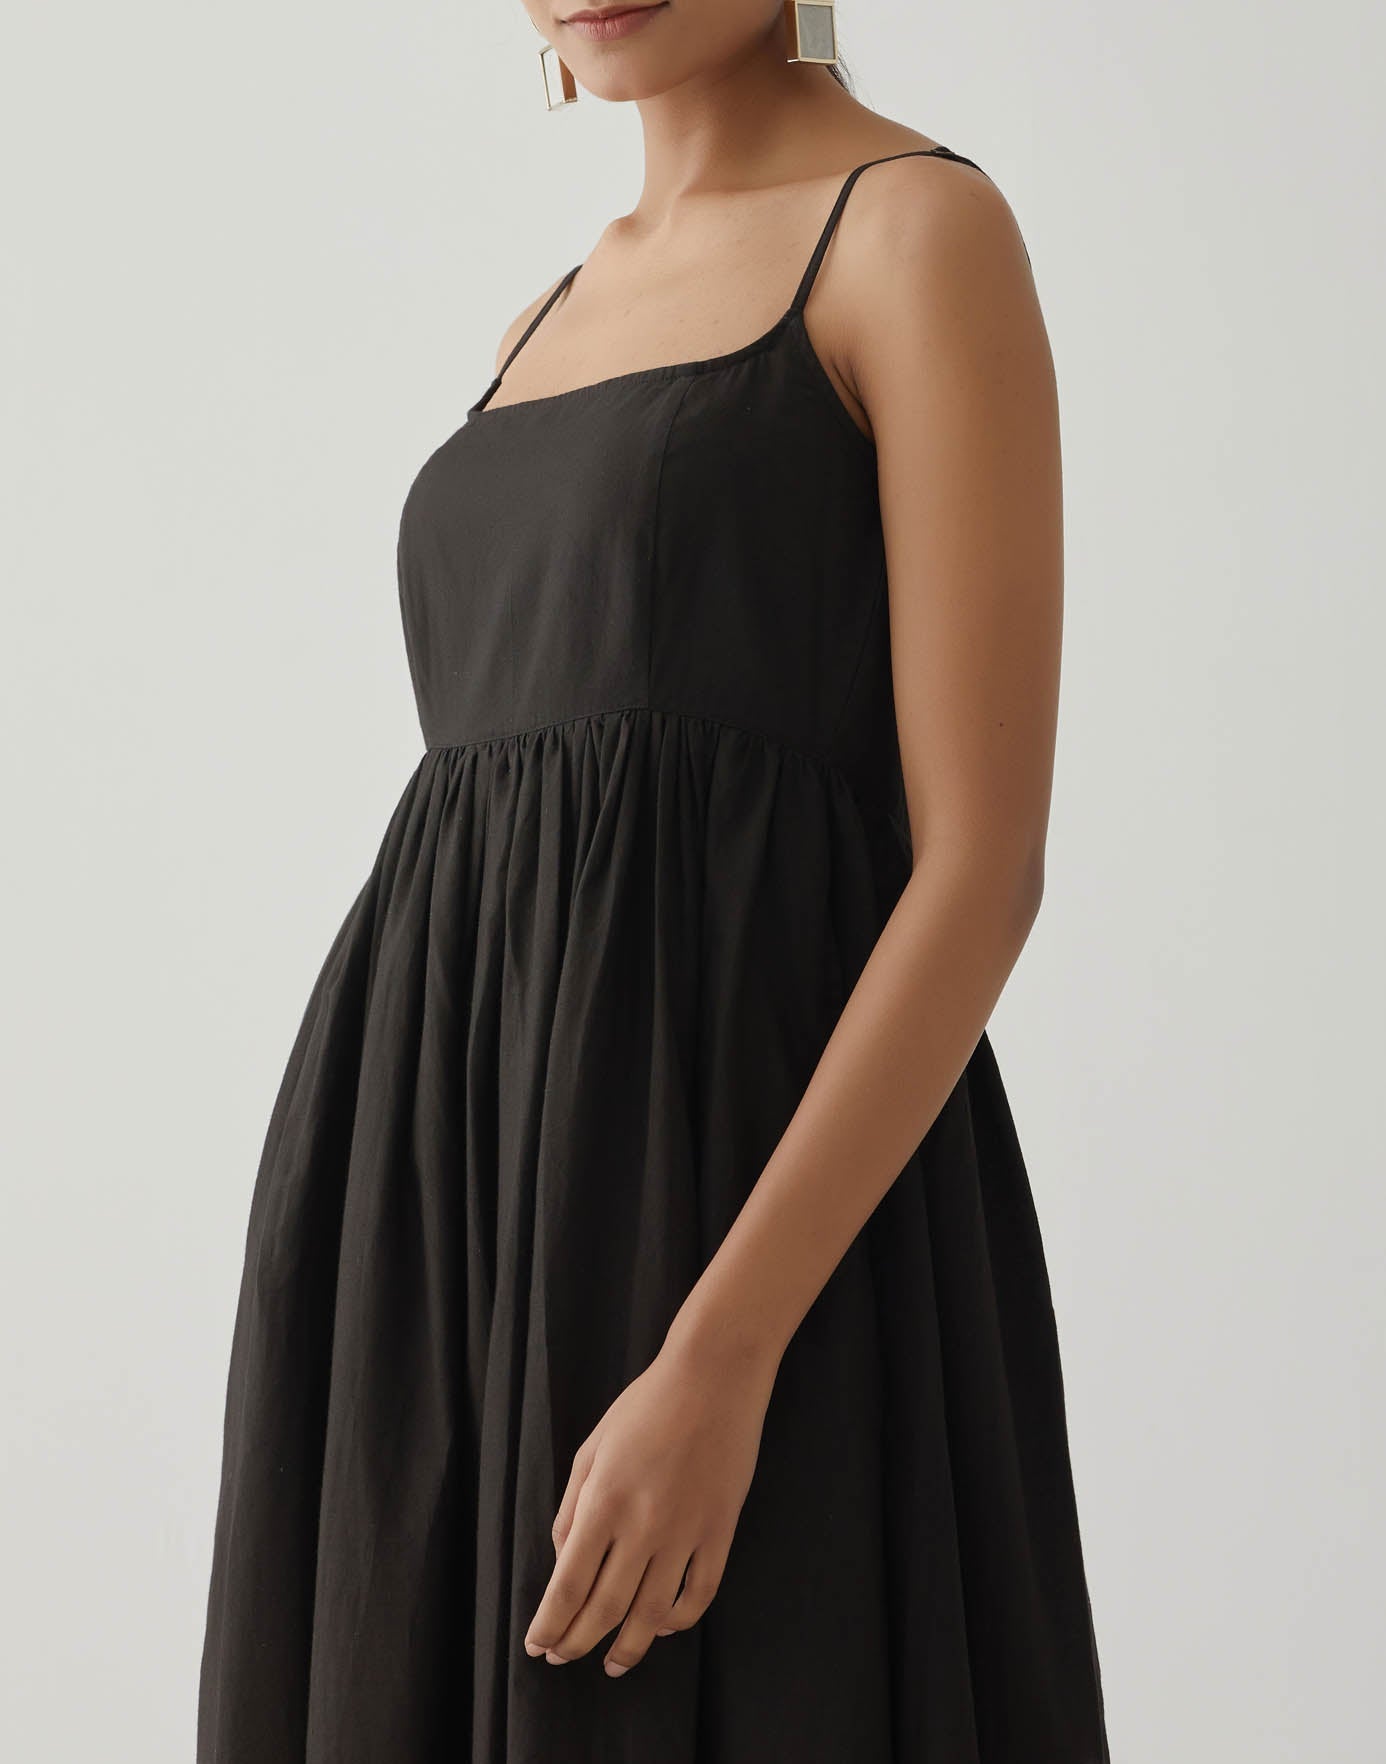 Black Strappy Rigel Dress - The Indian Cause